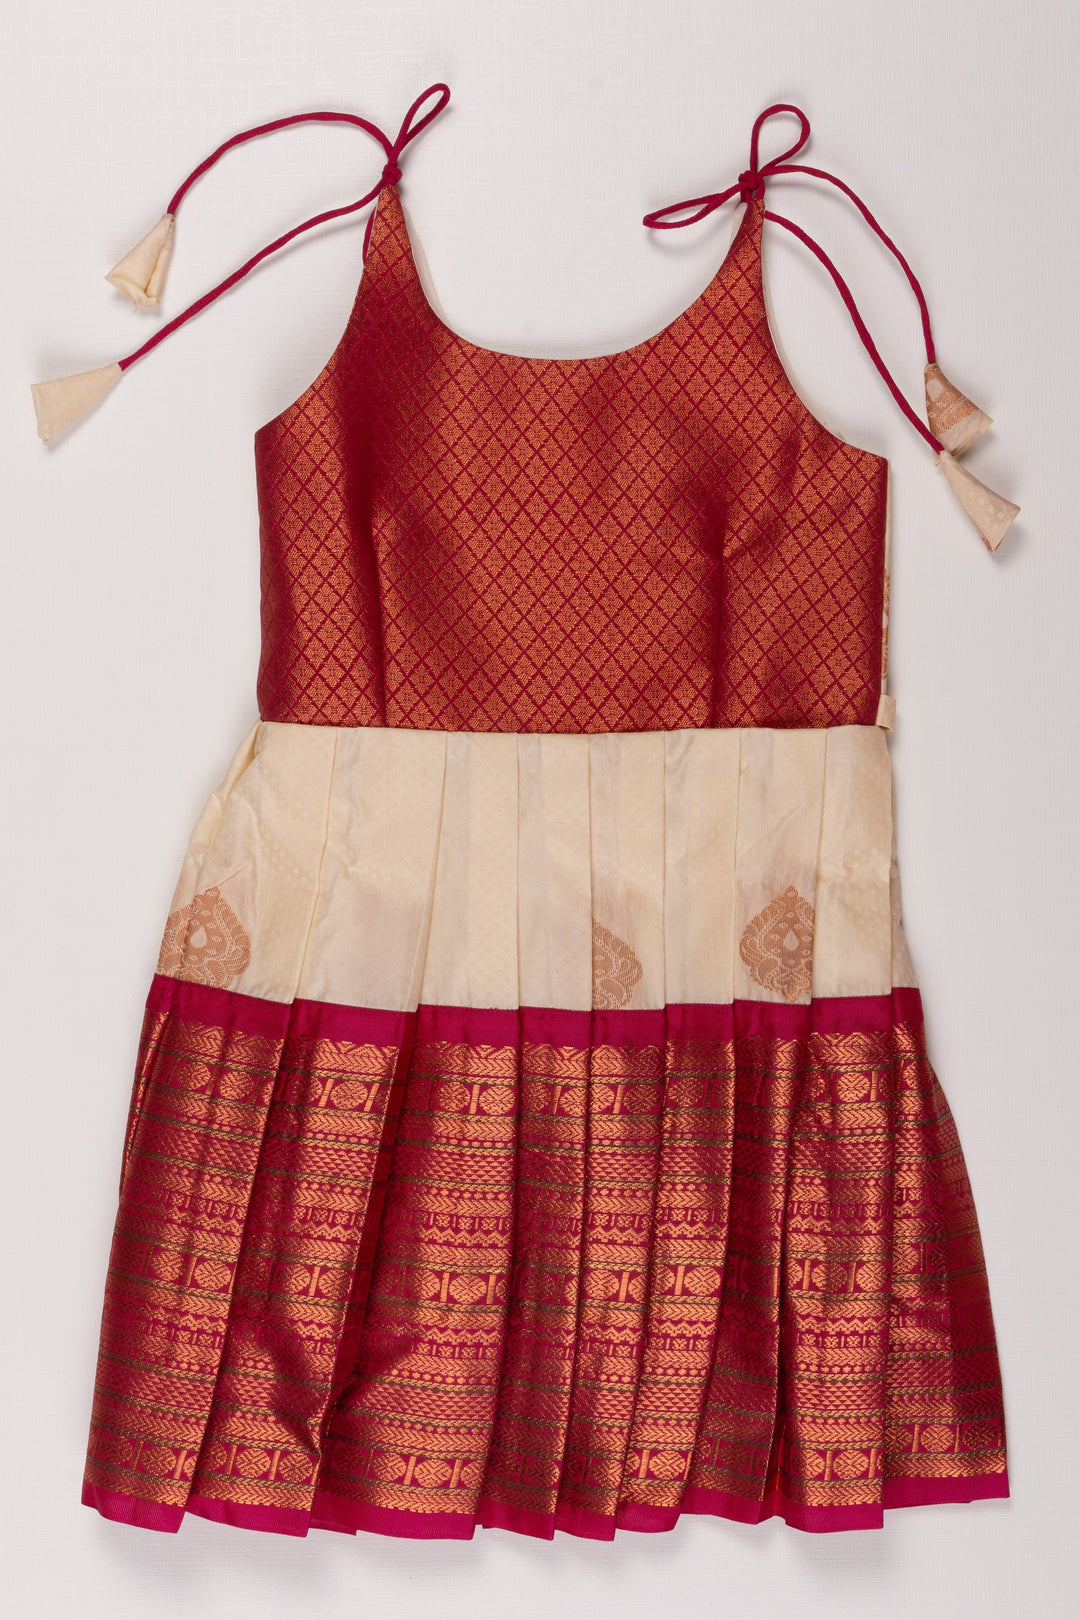 The Nesavu Tie Up Frock Elegant Maroon & Cream Silk Blend Frock with Golden Accents for Girls Nesavu 18 (2Y) / White / Style 1 T339A-18 Girls' Maroon & Cream Silk Party Frock with Golden Print | Festive Wear for Kids | The Nesavu